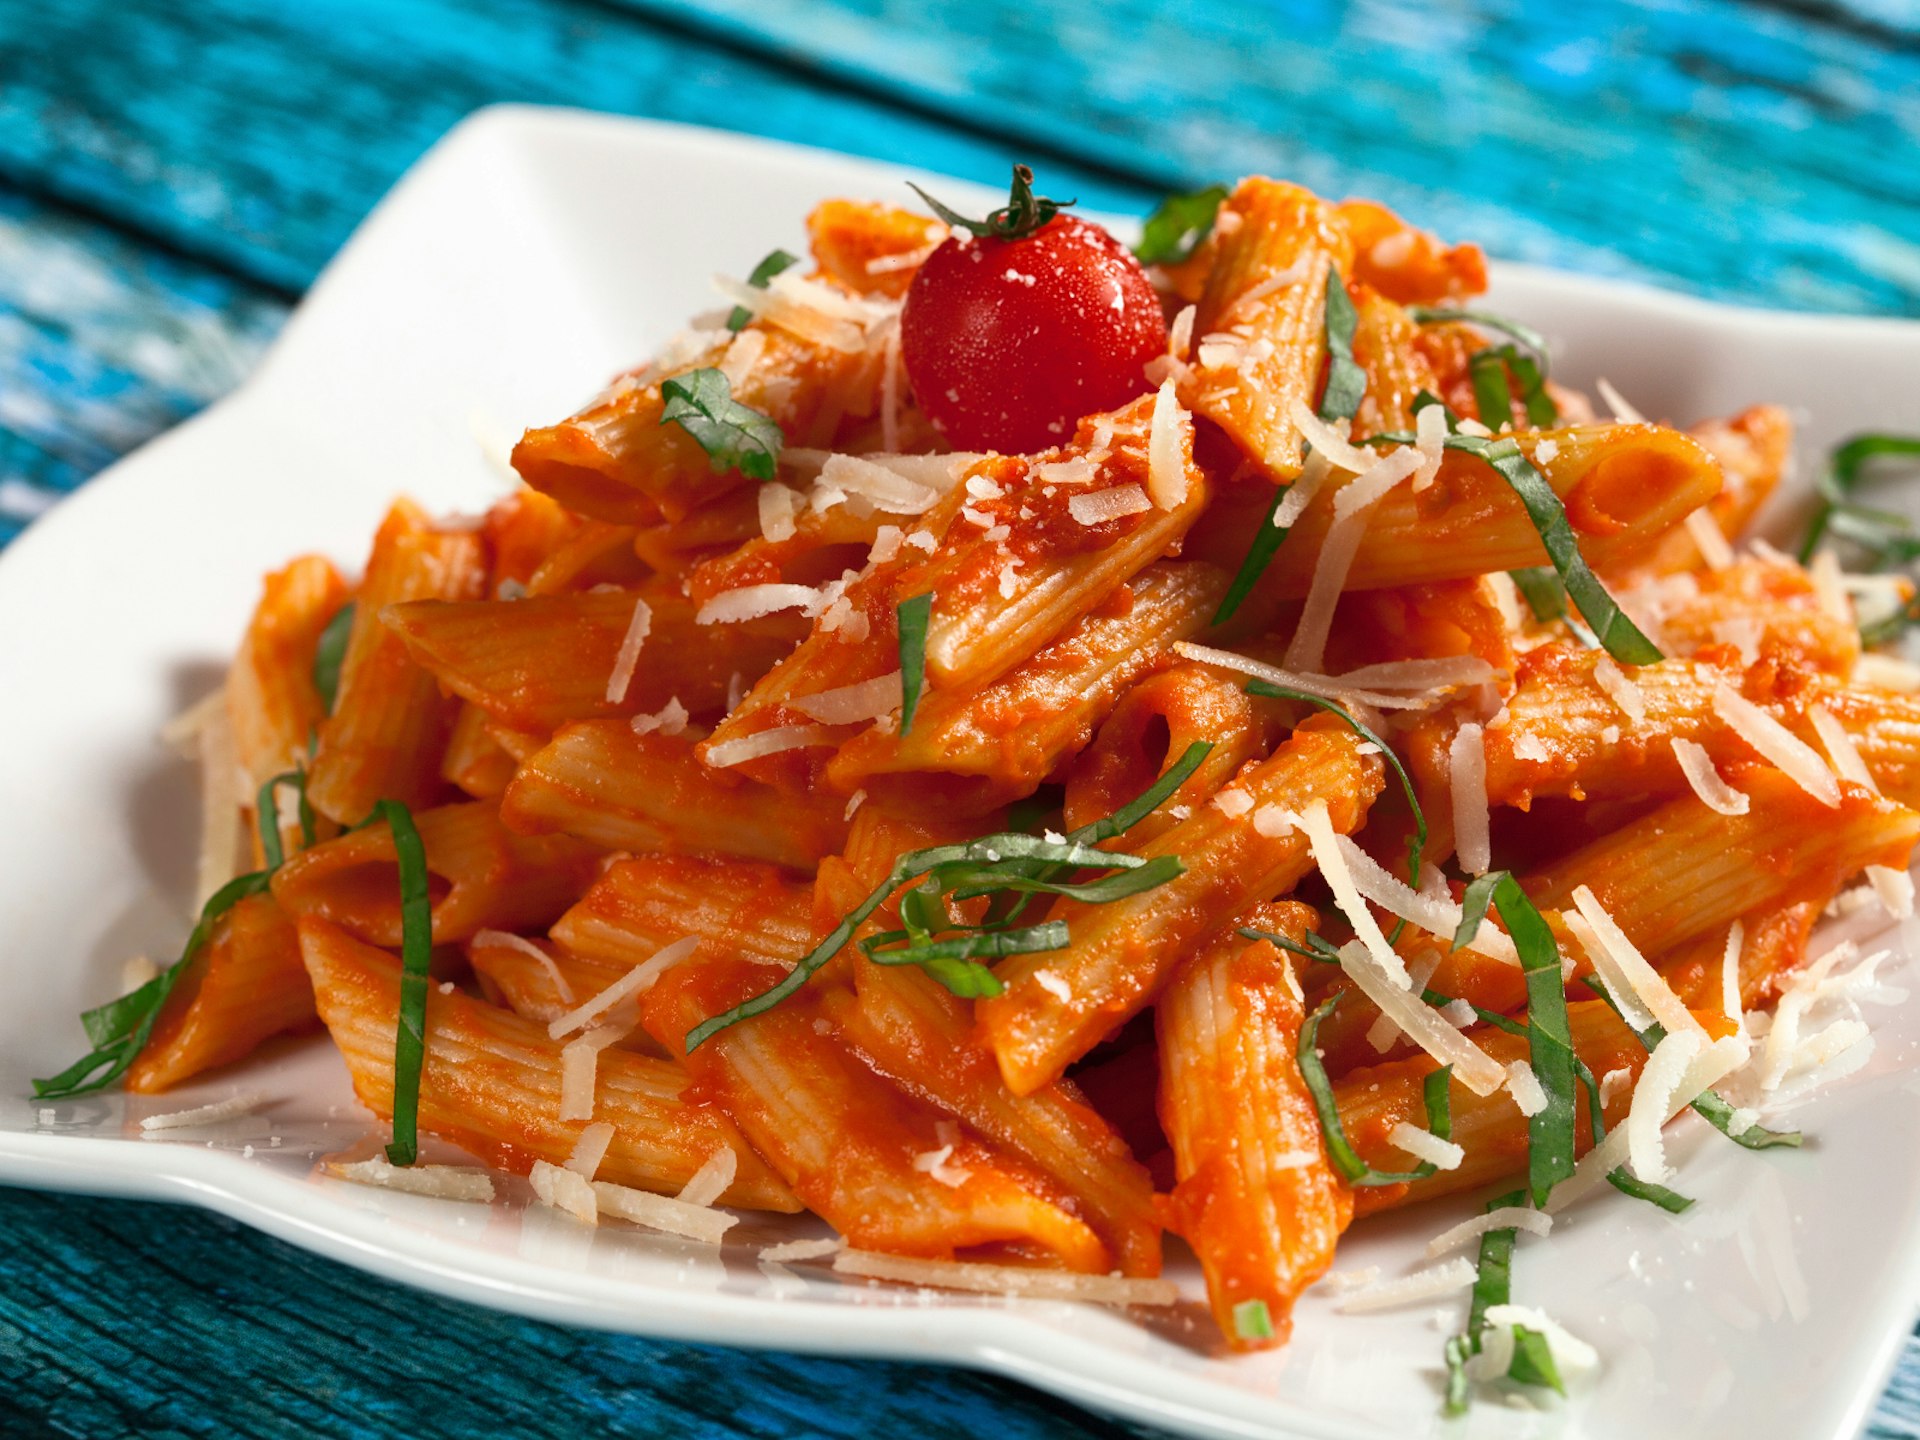 A plate of tomato pasta sauce and cheese © Ismayilov / Shutterstock